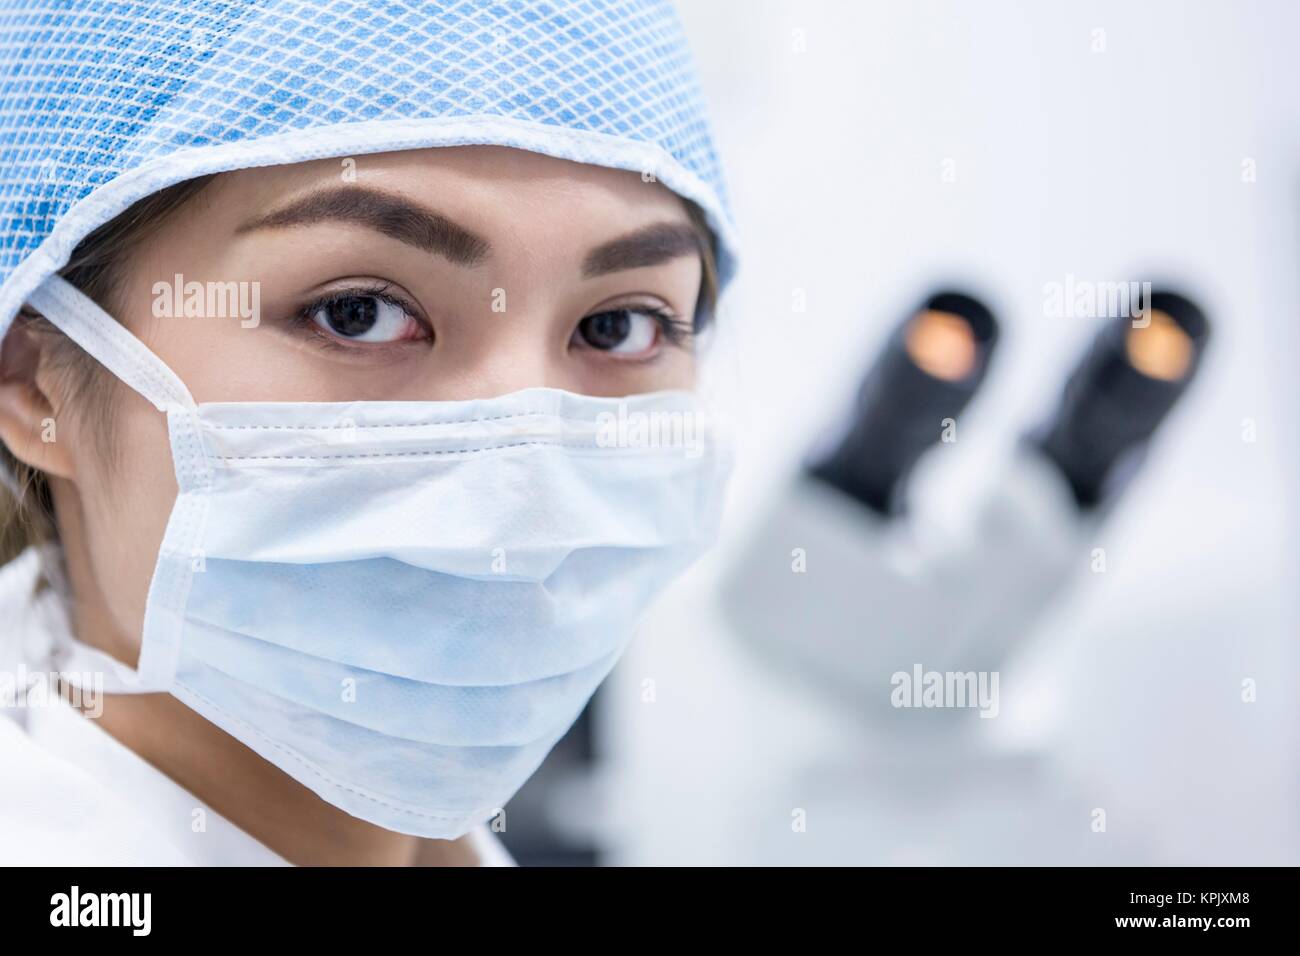 Female doctor wearing protective mask, portrait. Stock Photo